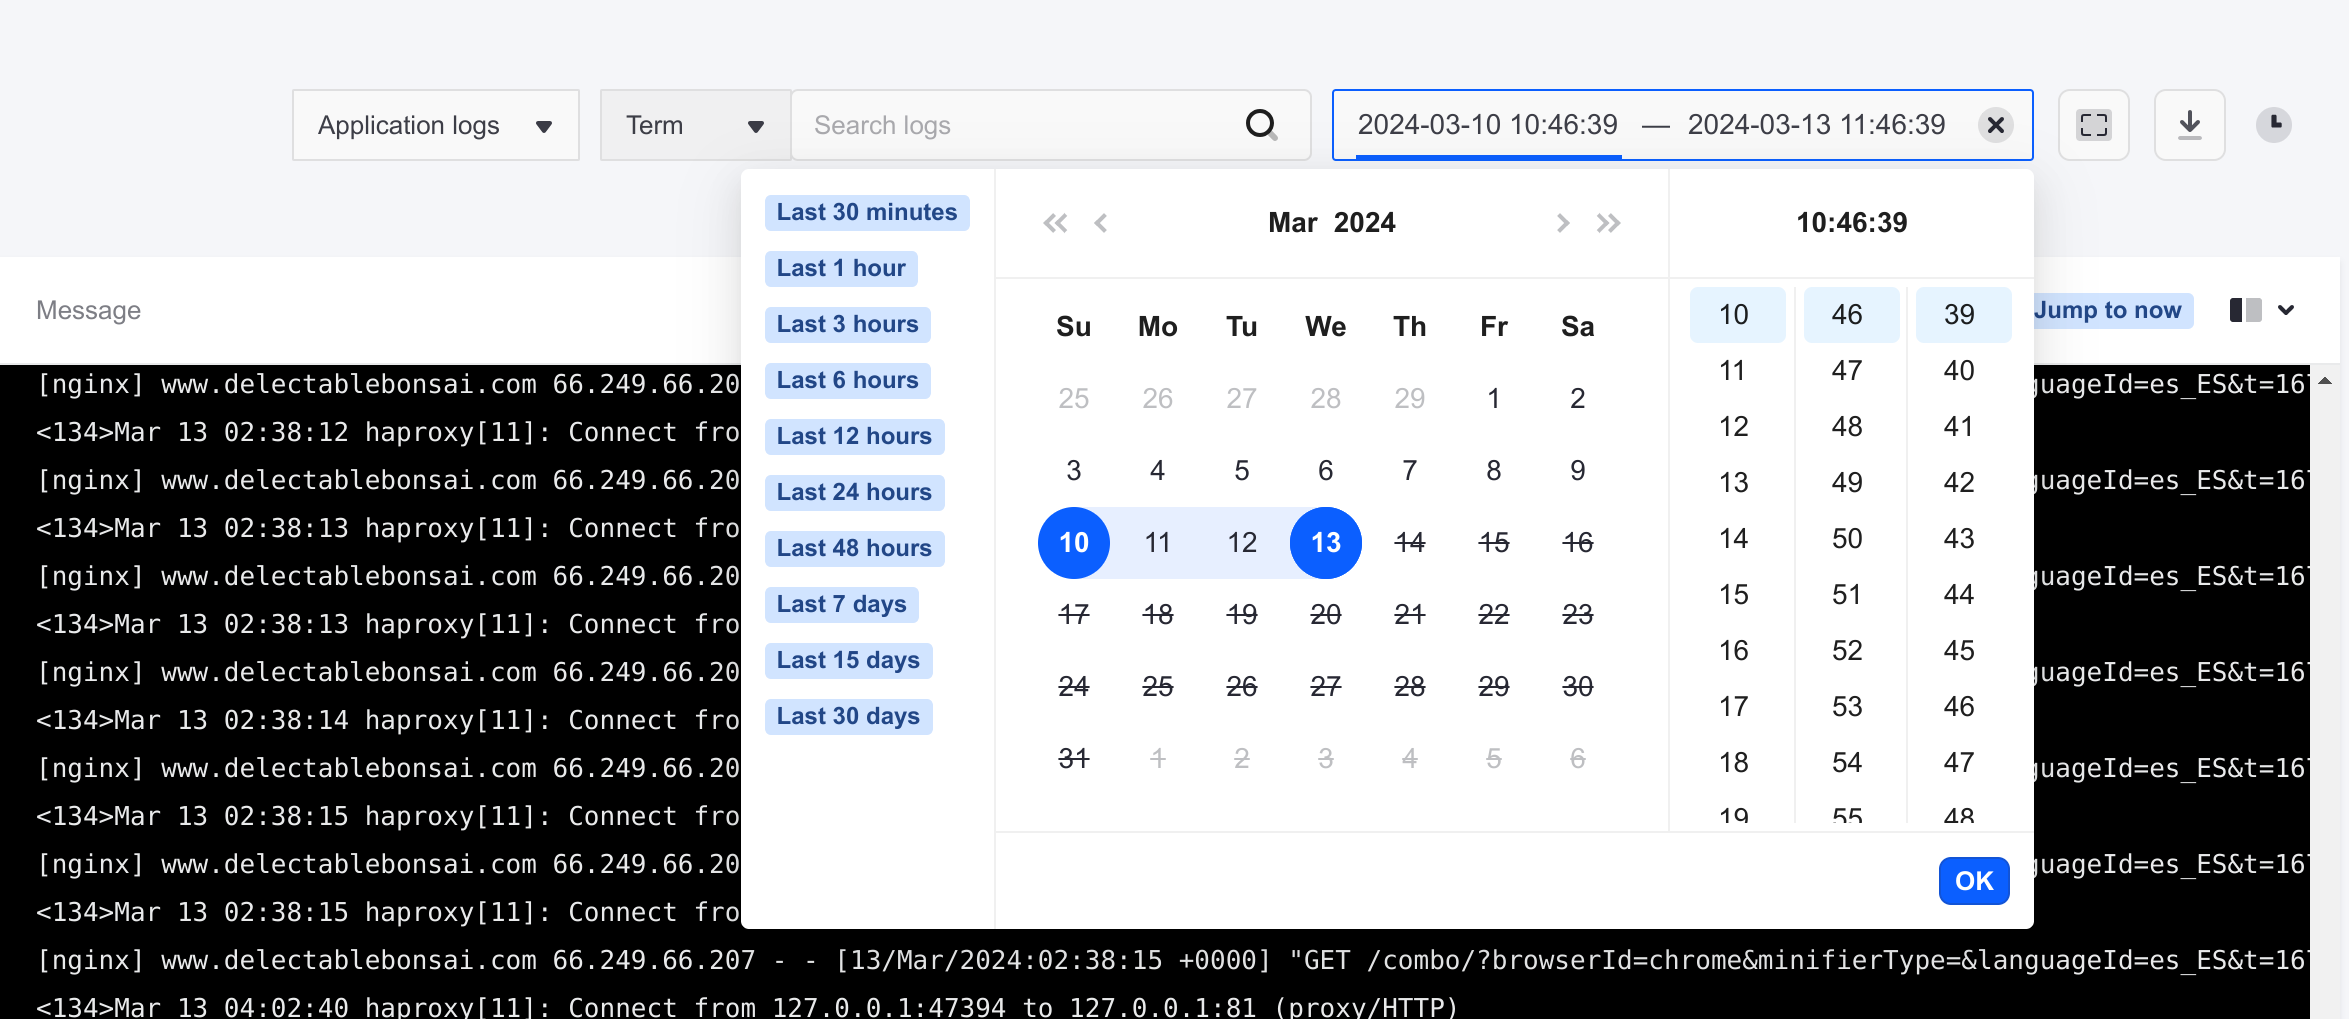 Use the date picker to see logs from a specific date range.